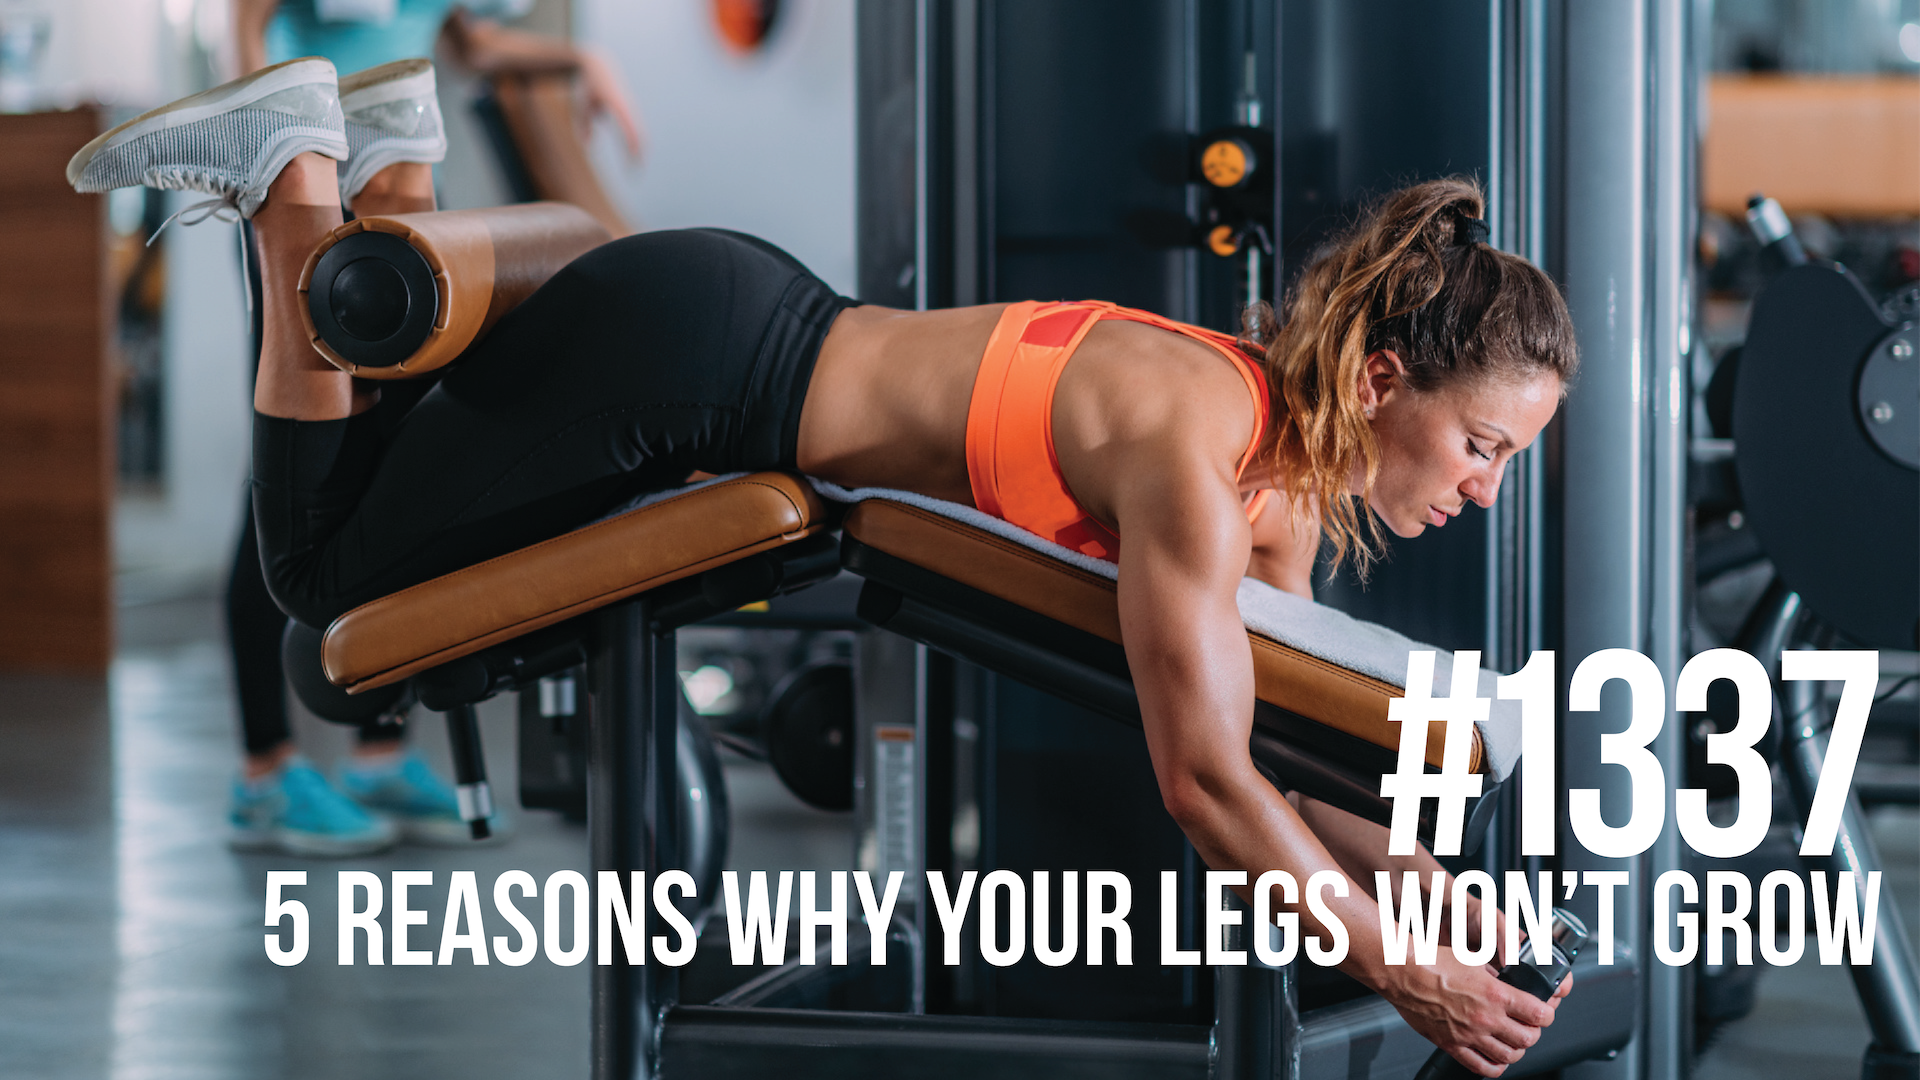 1337: Five Reasons Why Your Legs Won’t Grow